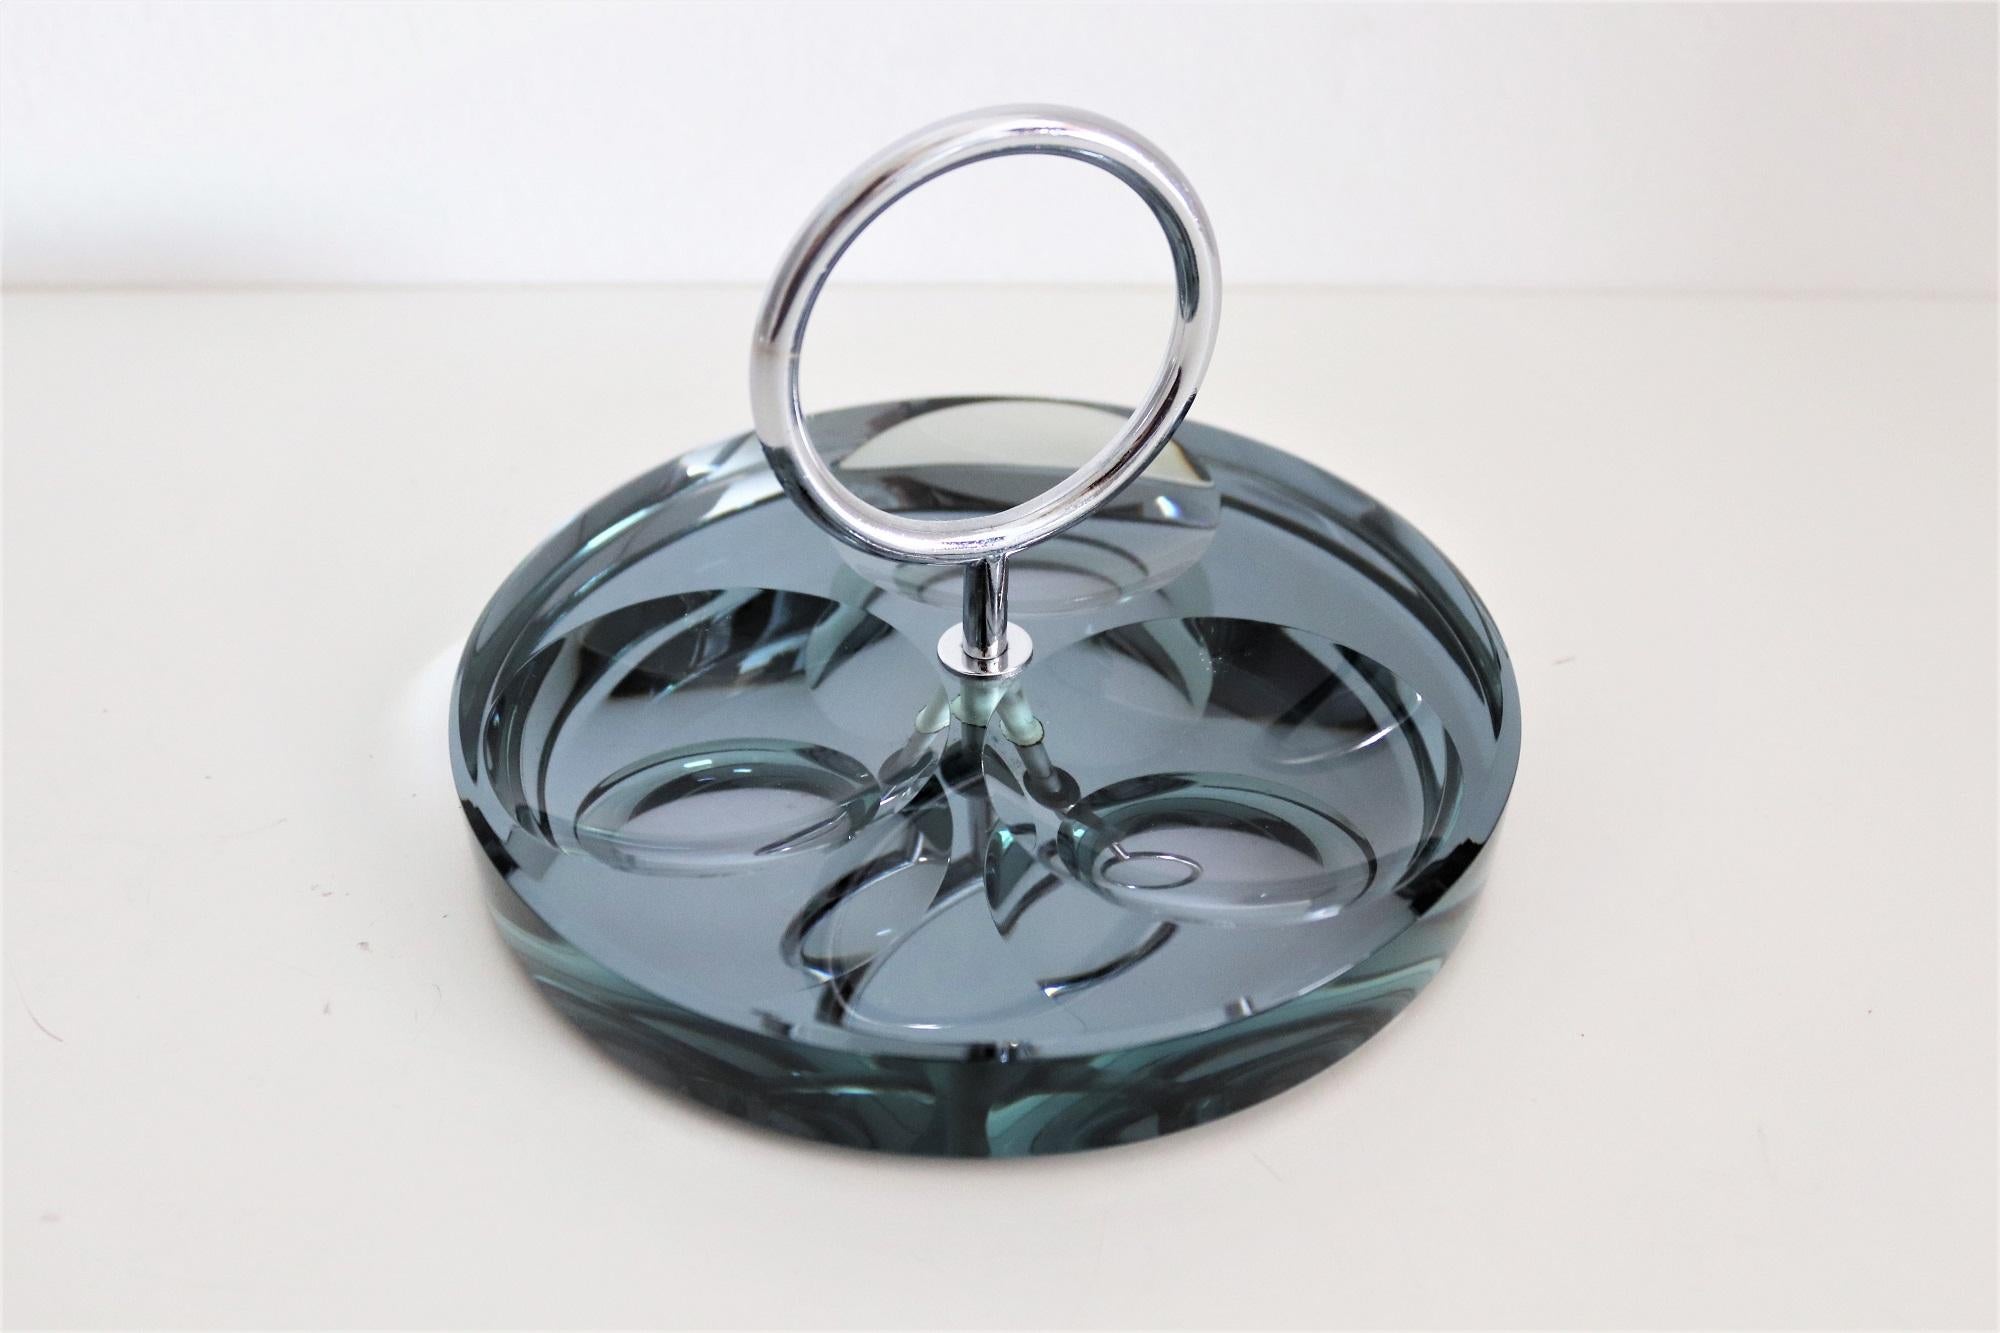 Magnificent ashtray made of gorgeous thick mirrored crystal glass in beautiful grey-green color with three big round indentations on the glass.
With chrome holder fixed within the glass.
Made from Fontana Arte in the 1960s.
Excellent